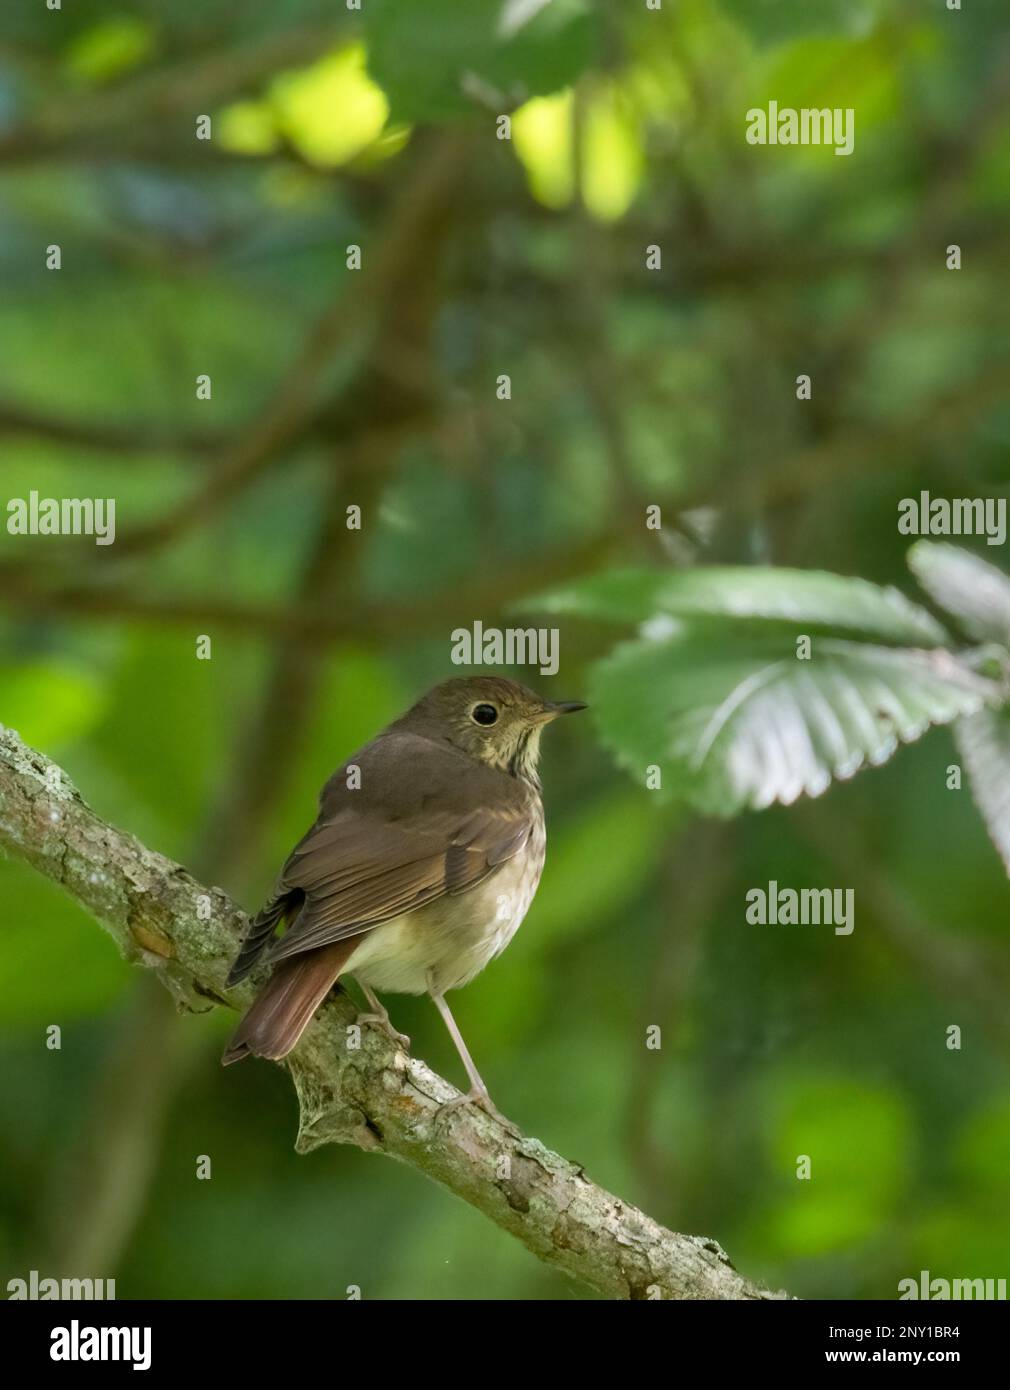 A Hermit Thrush on a  branch near green leaves Stock Photo